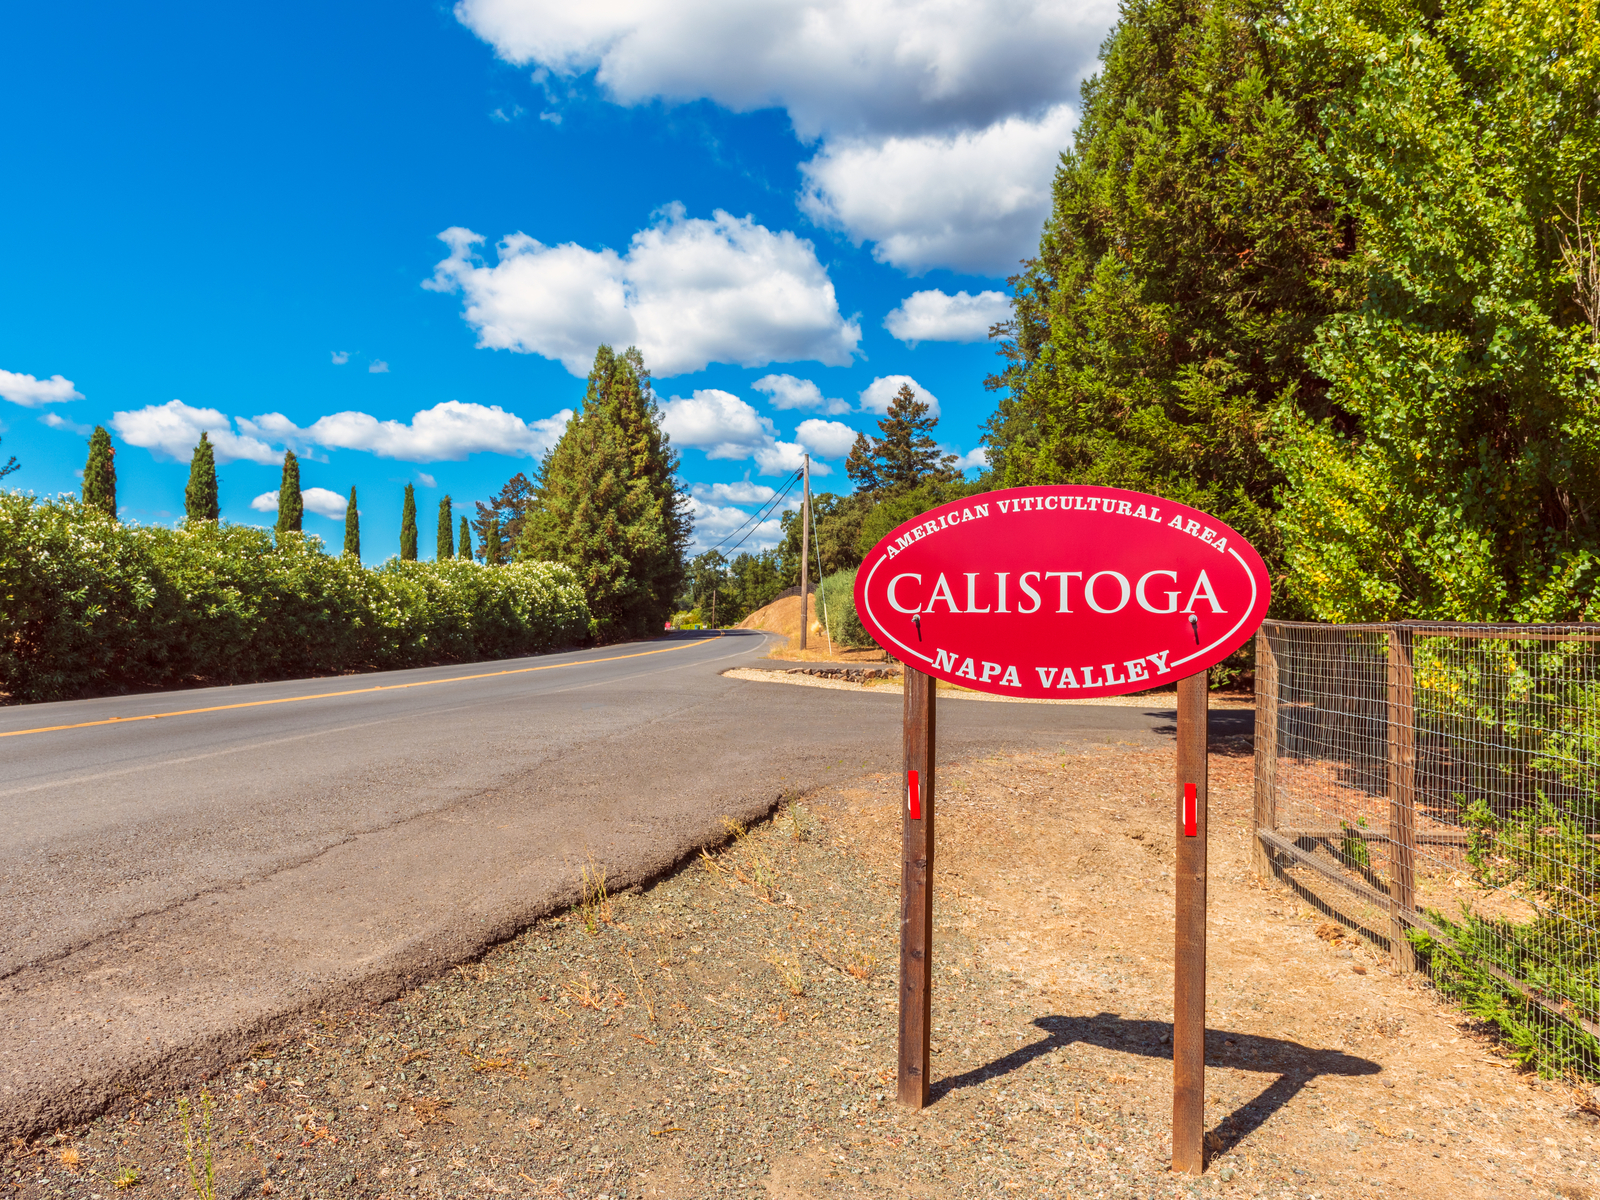 Entrance sign to Calistoga during the Summer heat, the worst time to visit Napa Valley